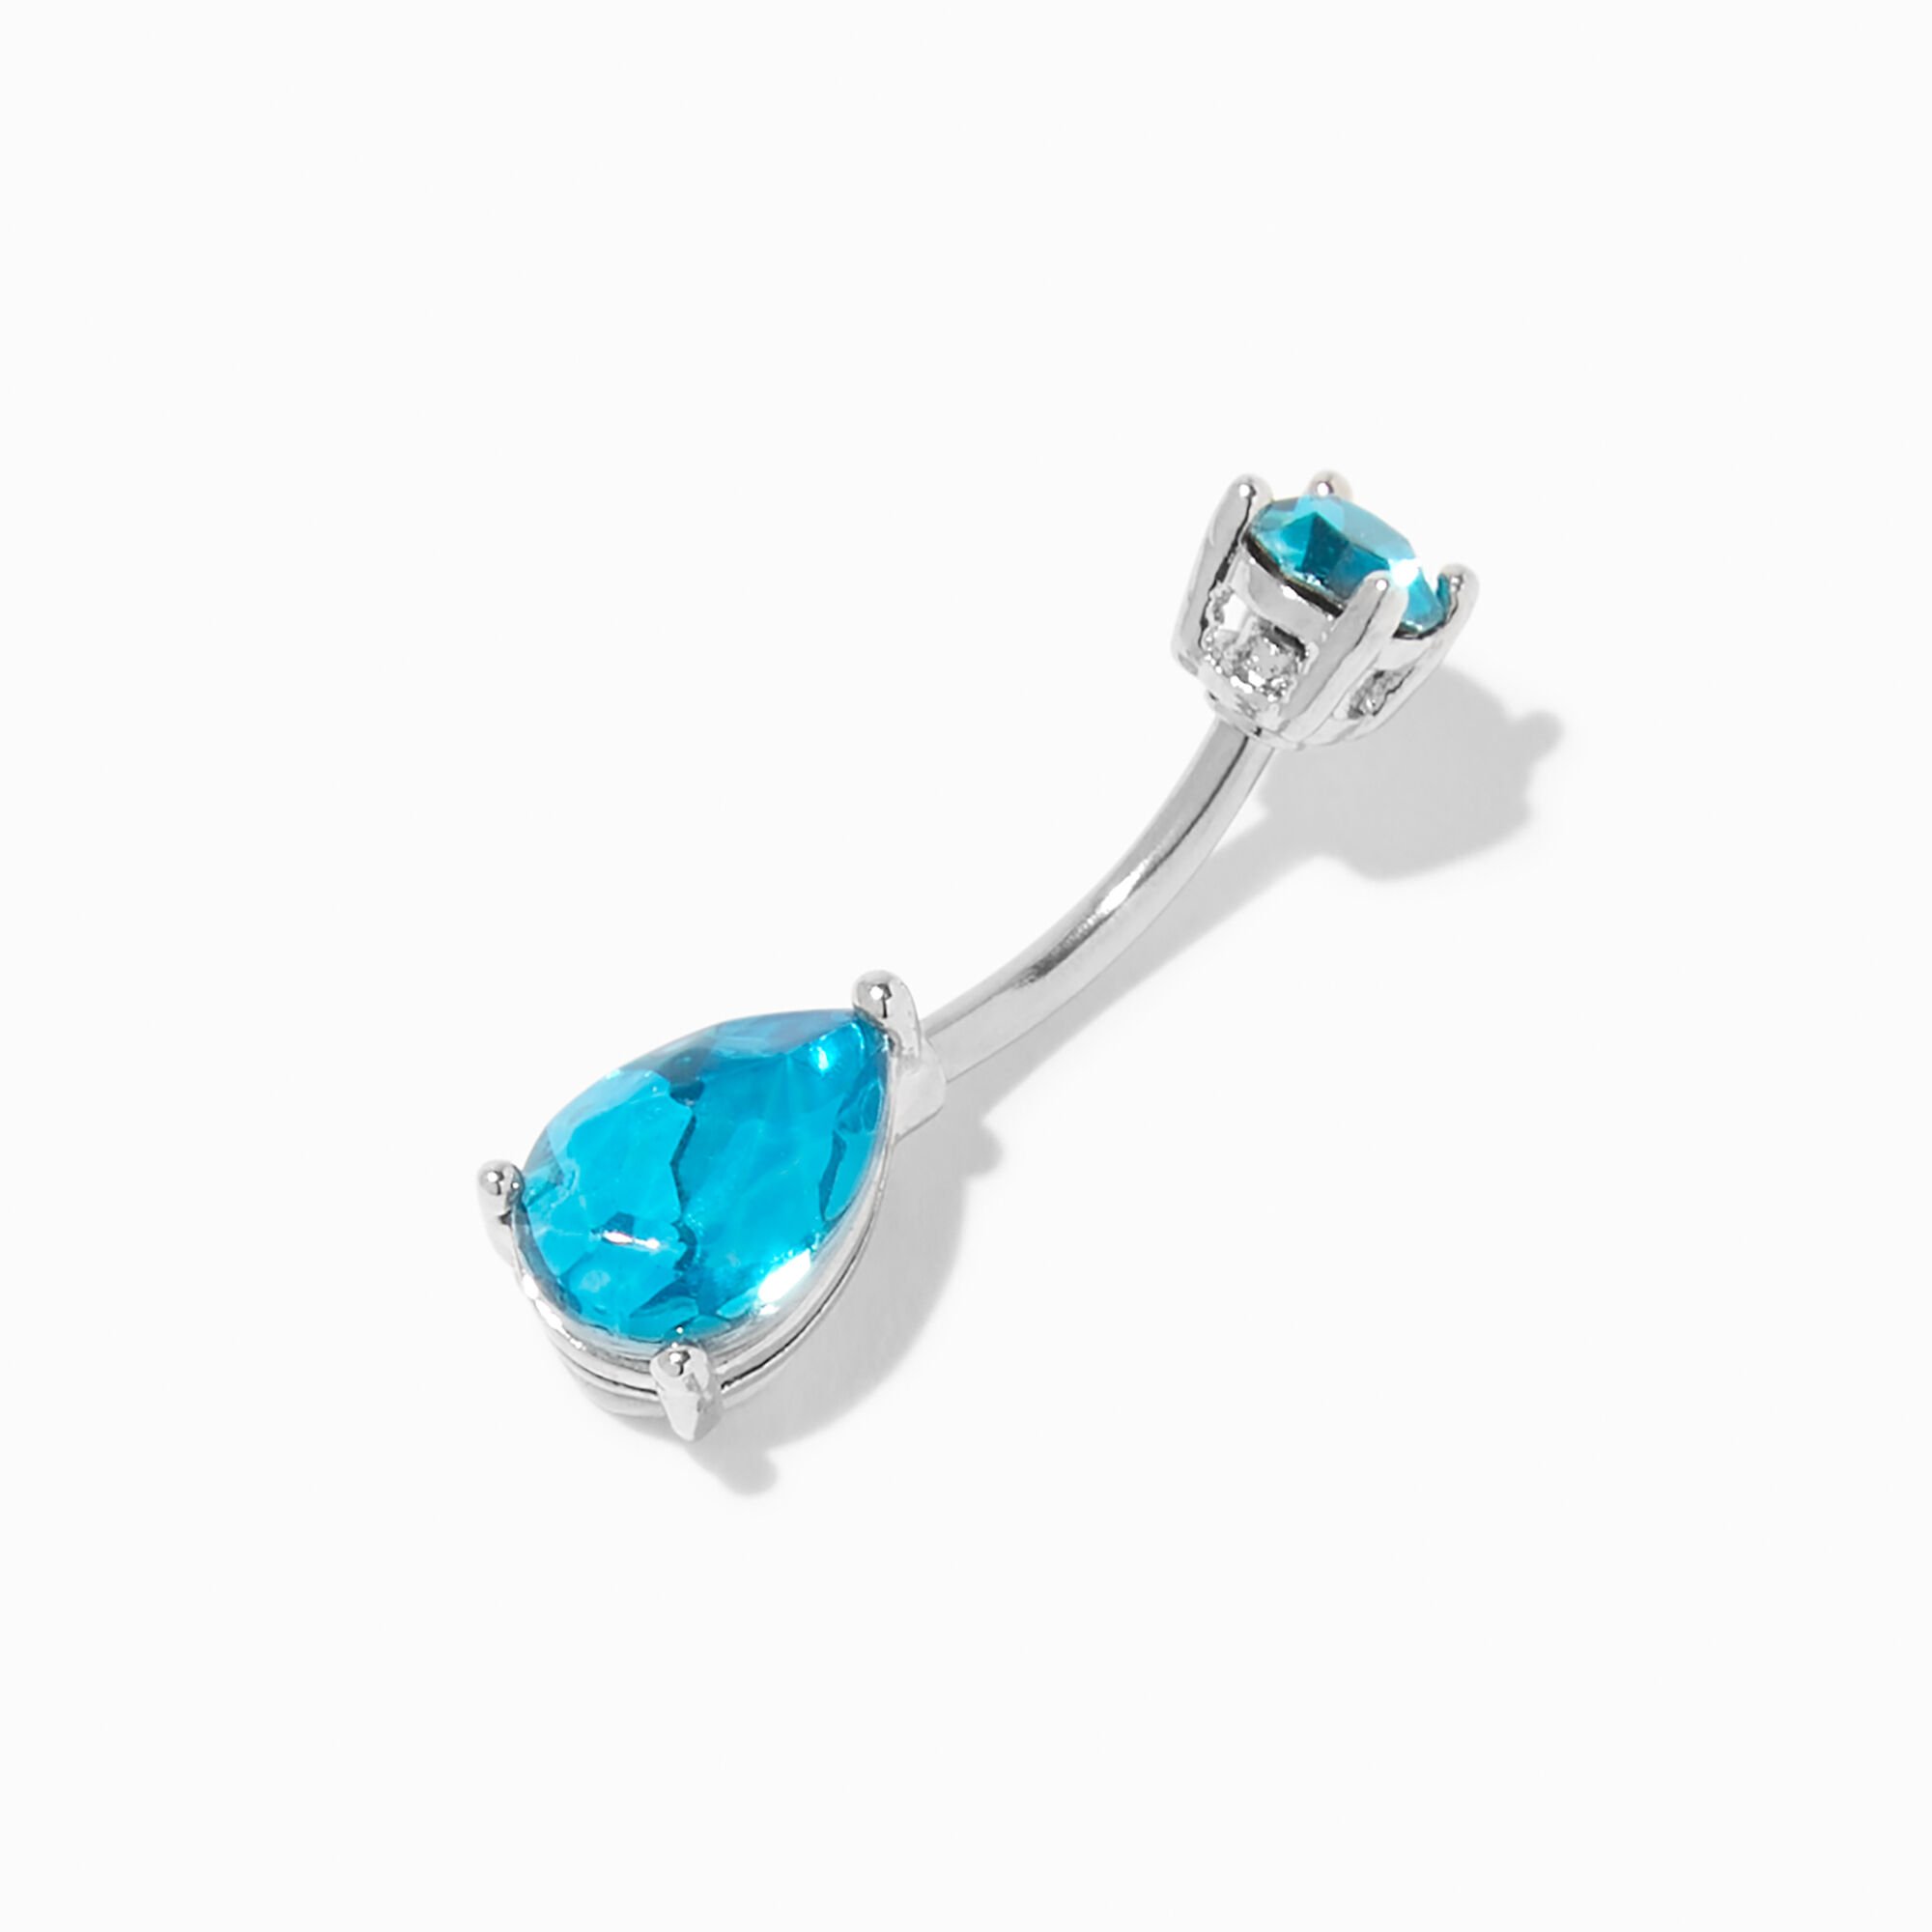 View Claires Silver 14G Teardrop Crystal Belly Bar Blue information